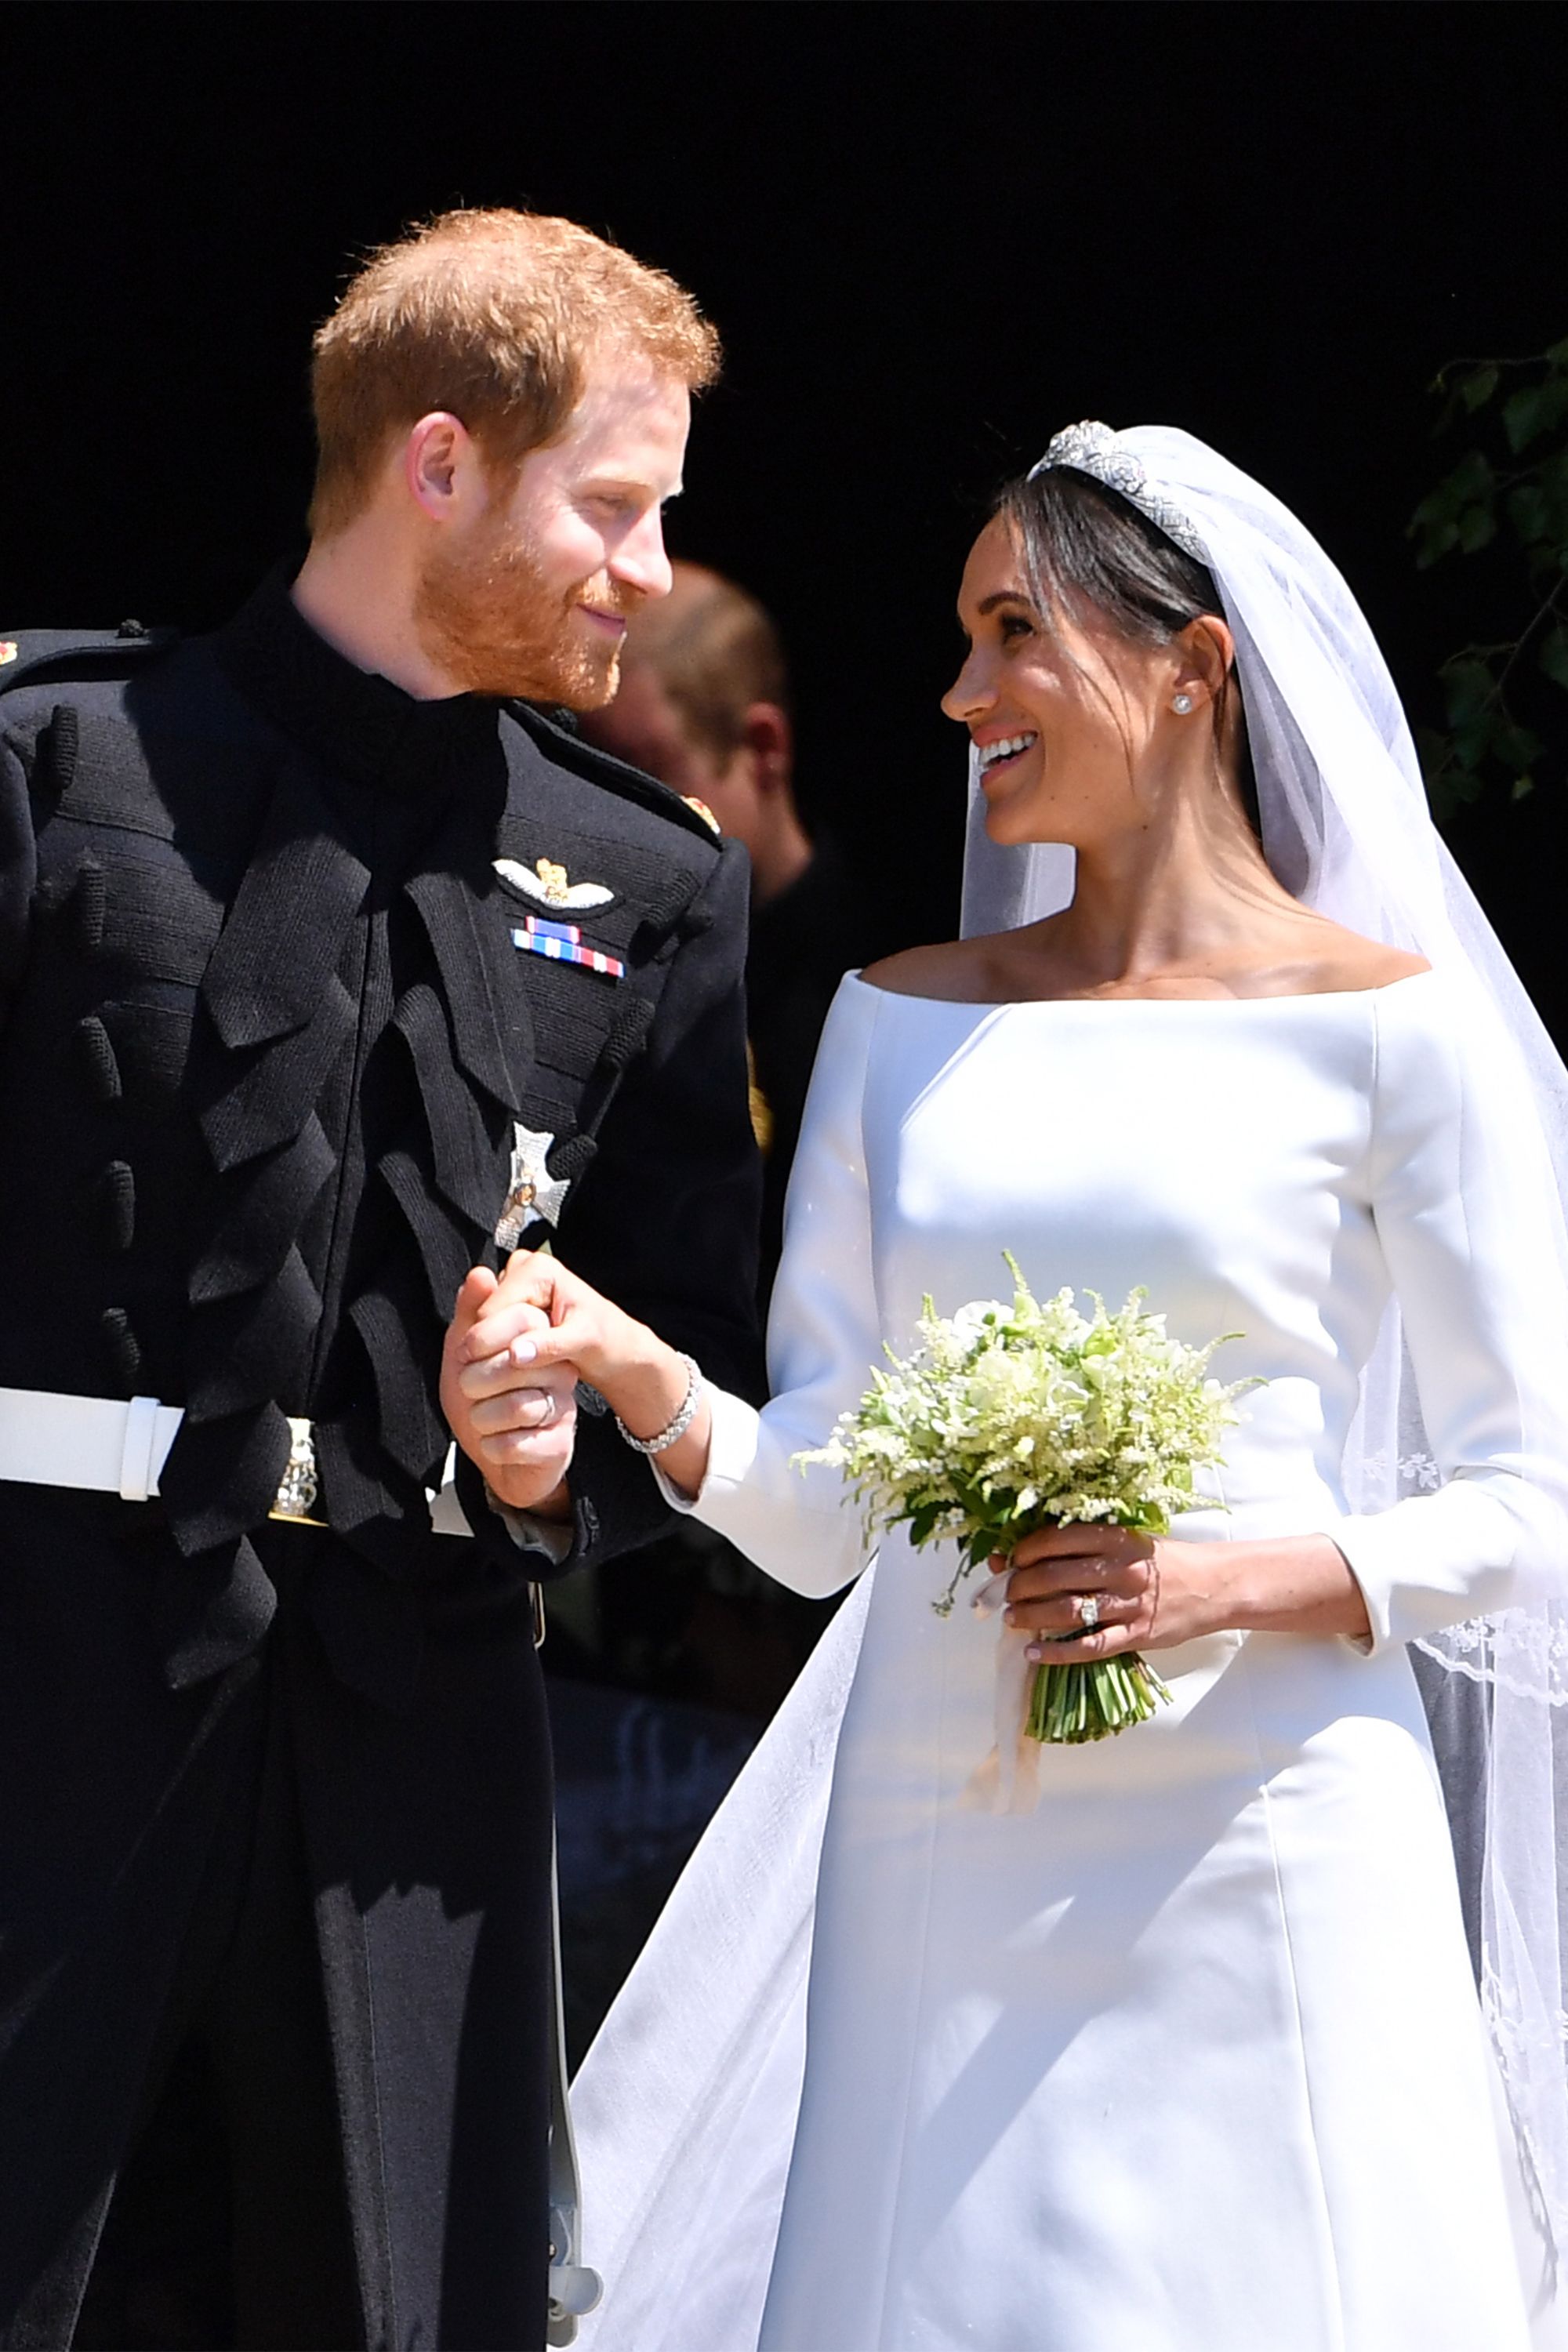 https://hips.hearstapps.com/hmg-prod.s3.amazonaws.com/images/hbz-prince-harry-meghan-markle-cute-moments-2018-05-gettyimages-960096296-1557334669.jpg?crop=1xw:1xh;center,top